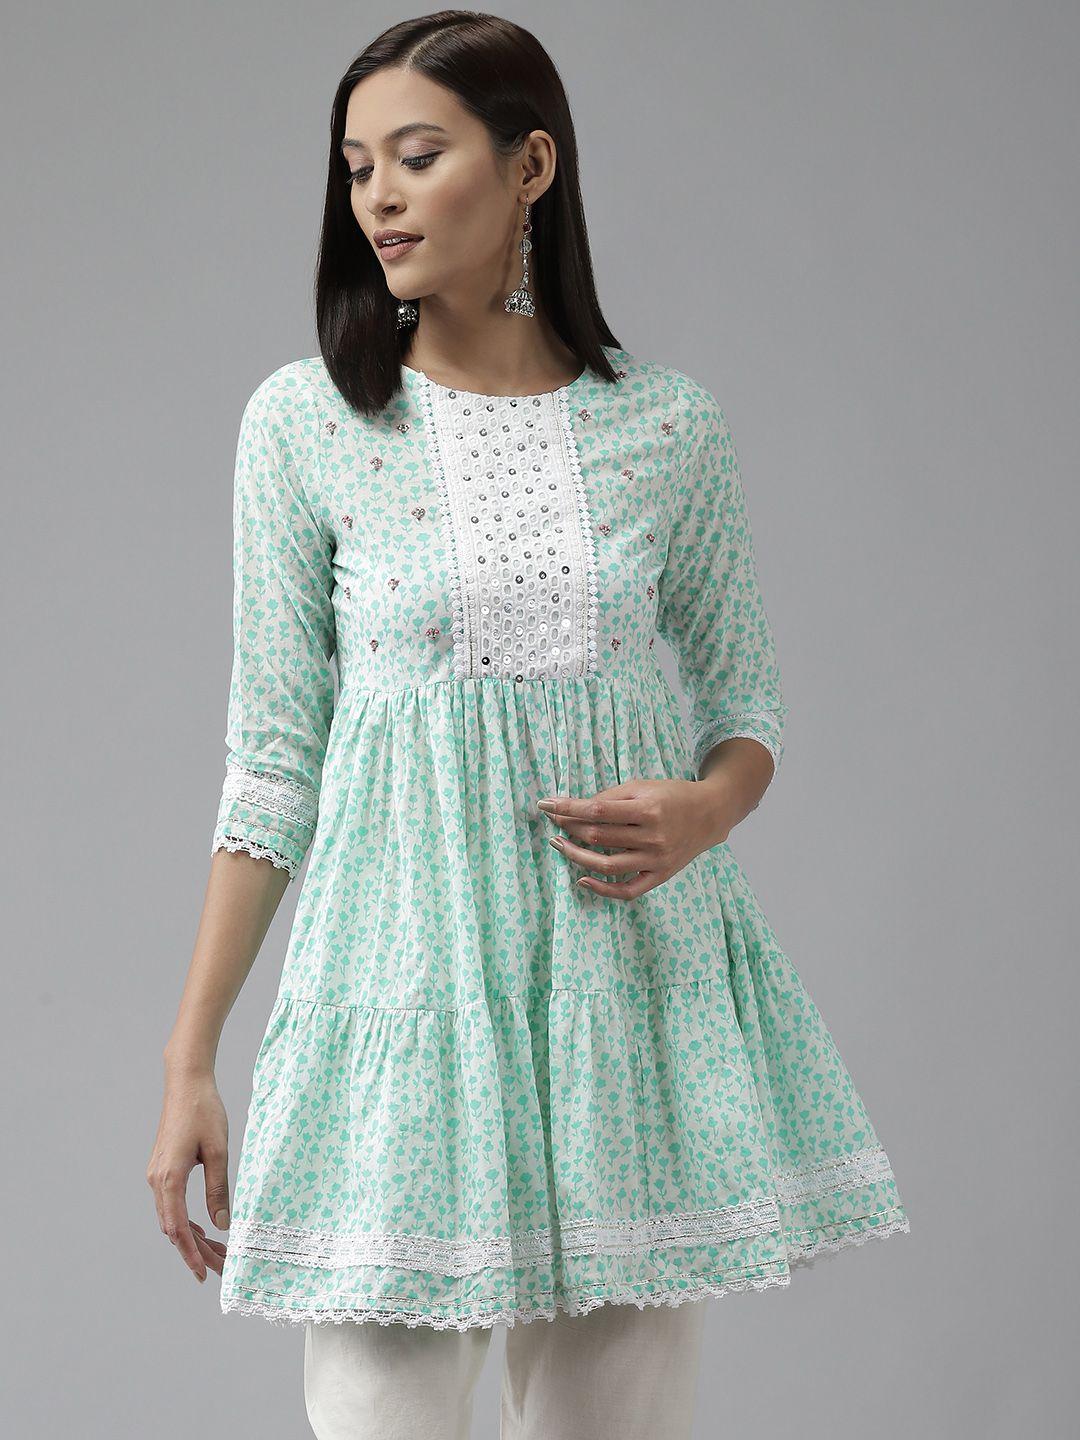 amirah-s-sea-green-&-white-ethnic-motifs-printed-lace-inserts-pleated-pure-cotton-tunic